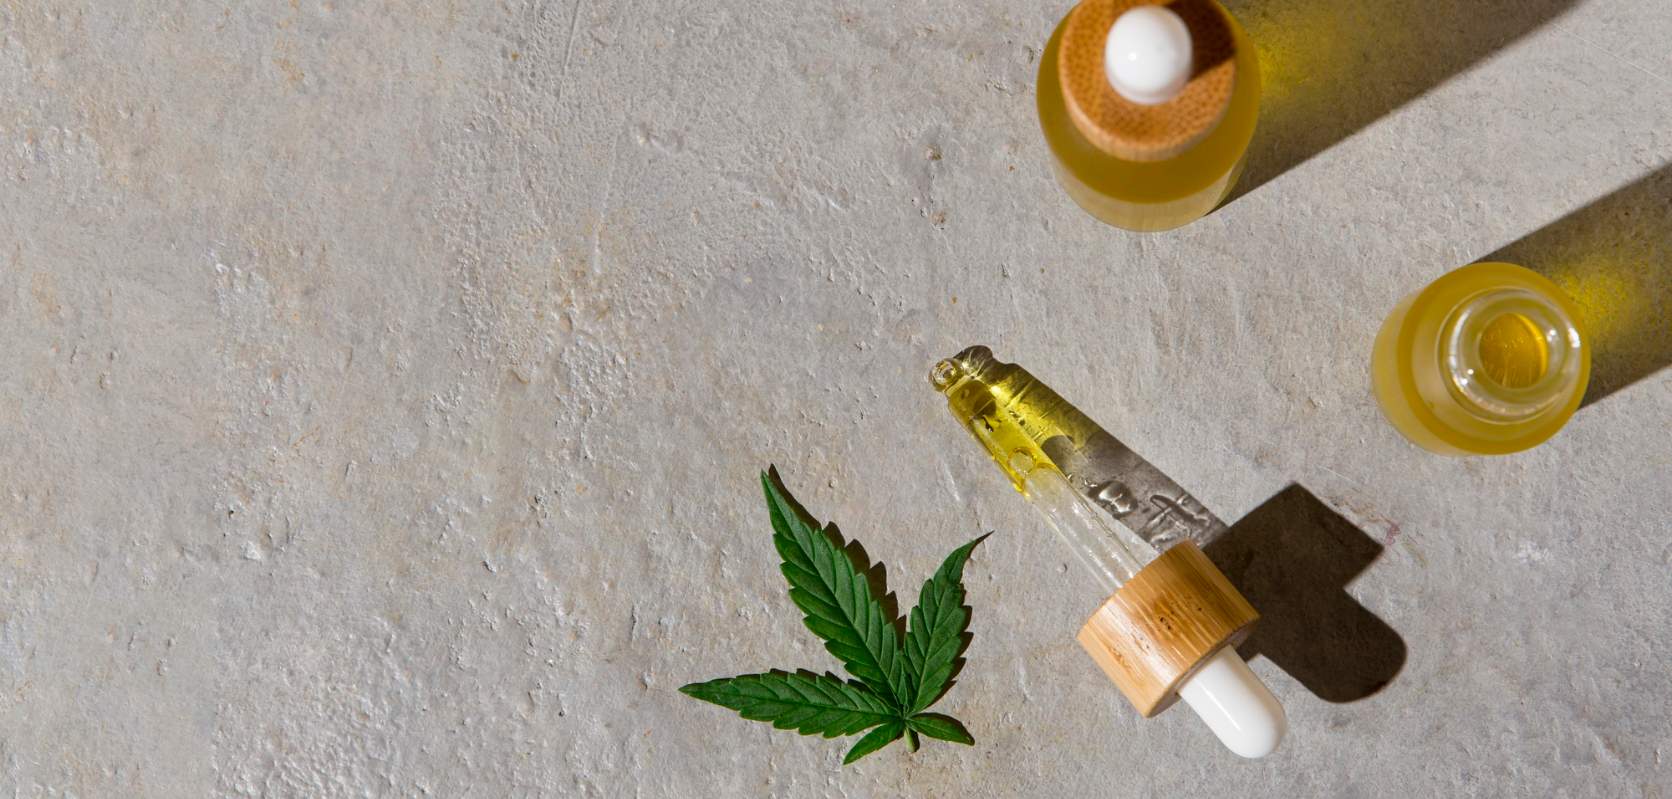 Other than the benefits listed in this same article, other effects of applying THC oil to the skin will depend on the specific products and the ingredients used in them. 